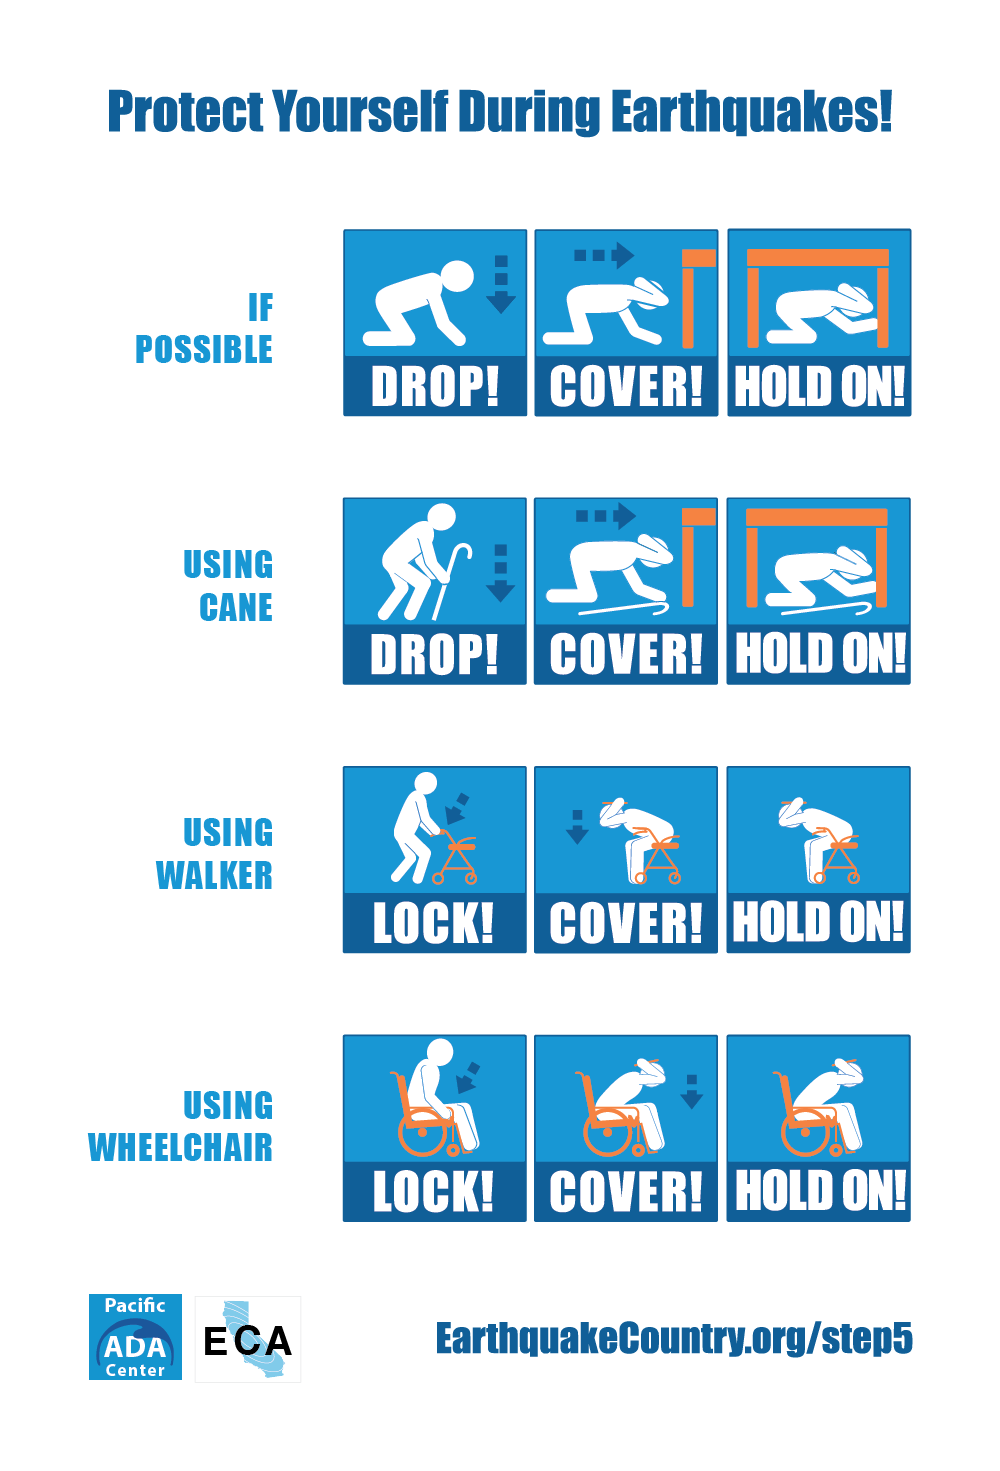 Drop, cover, and hold on instructions and images for people with and without disabilities and other access or functional needs. 